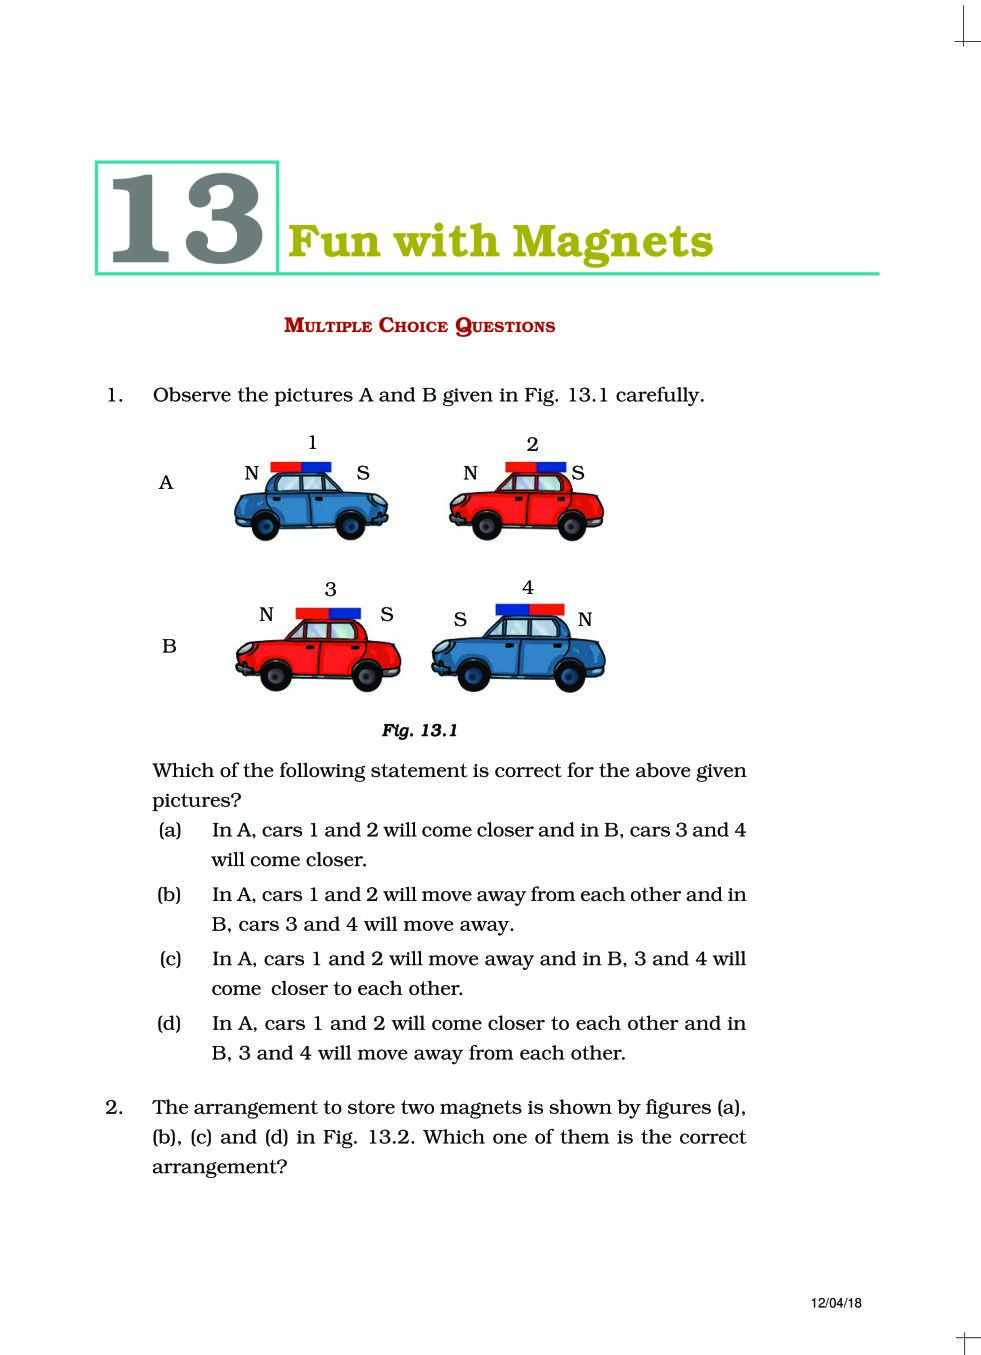 NCERT Exemplar Class 06 Science Unit 13 Fun with Magnets - Page 1